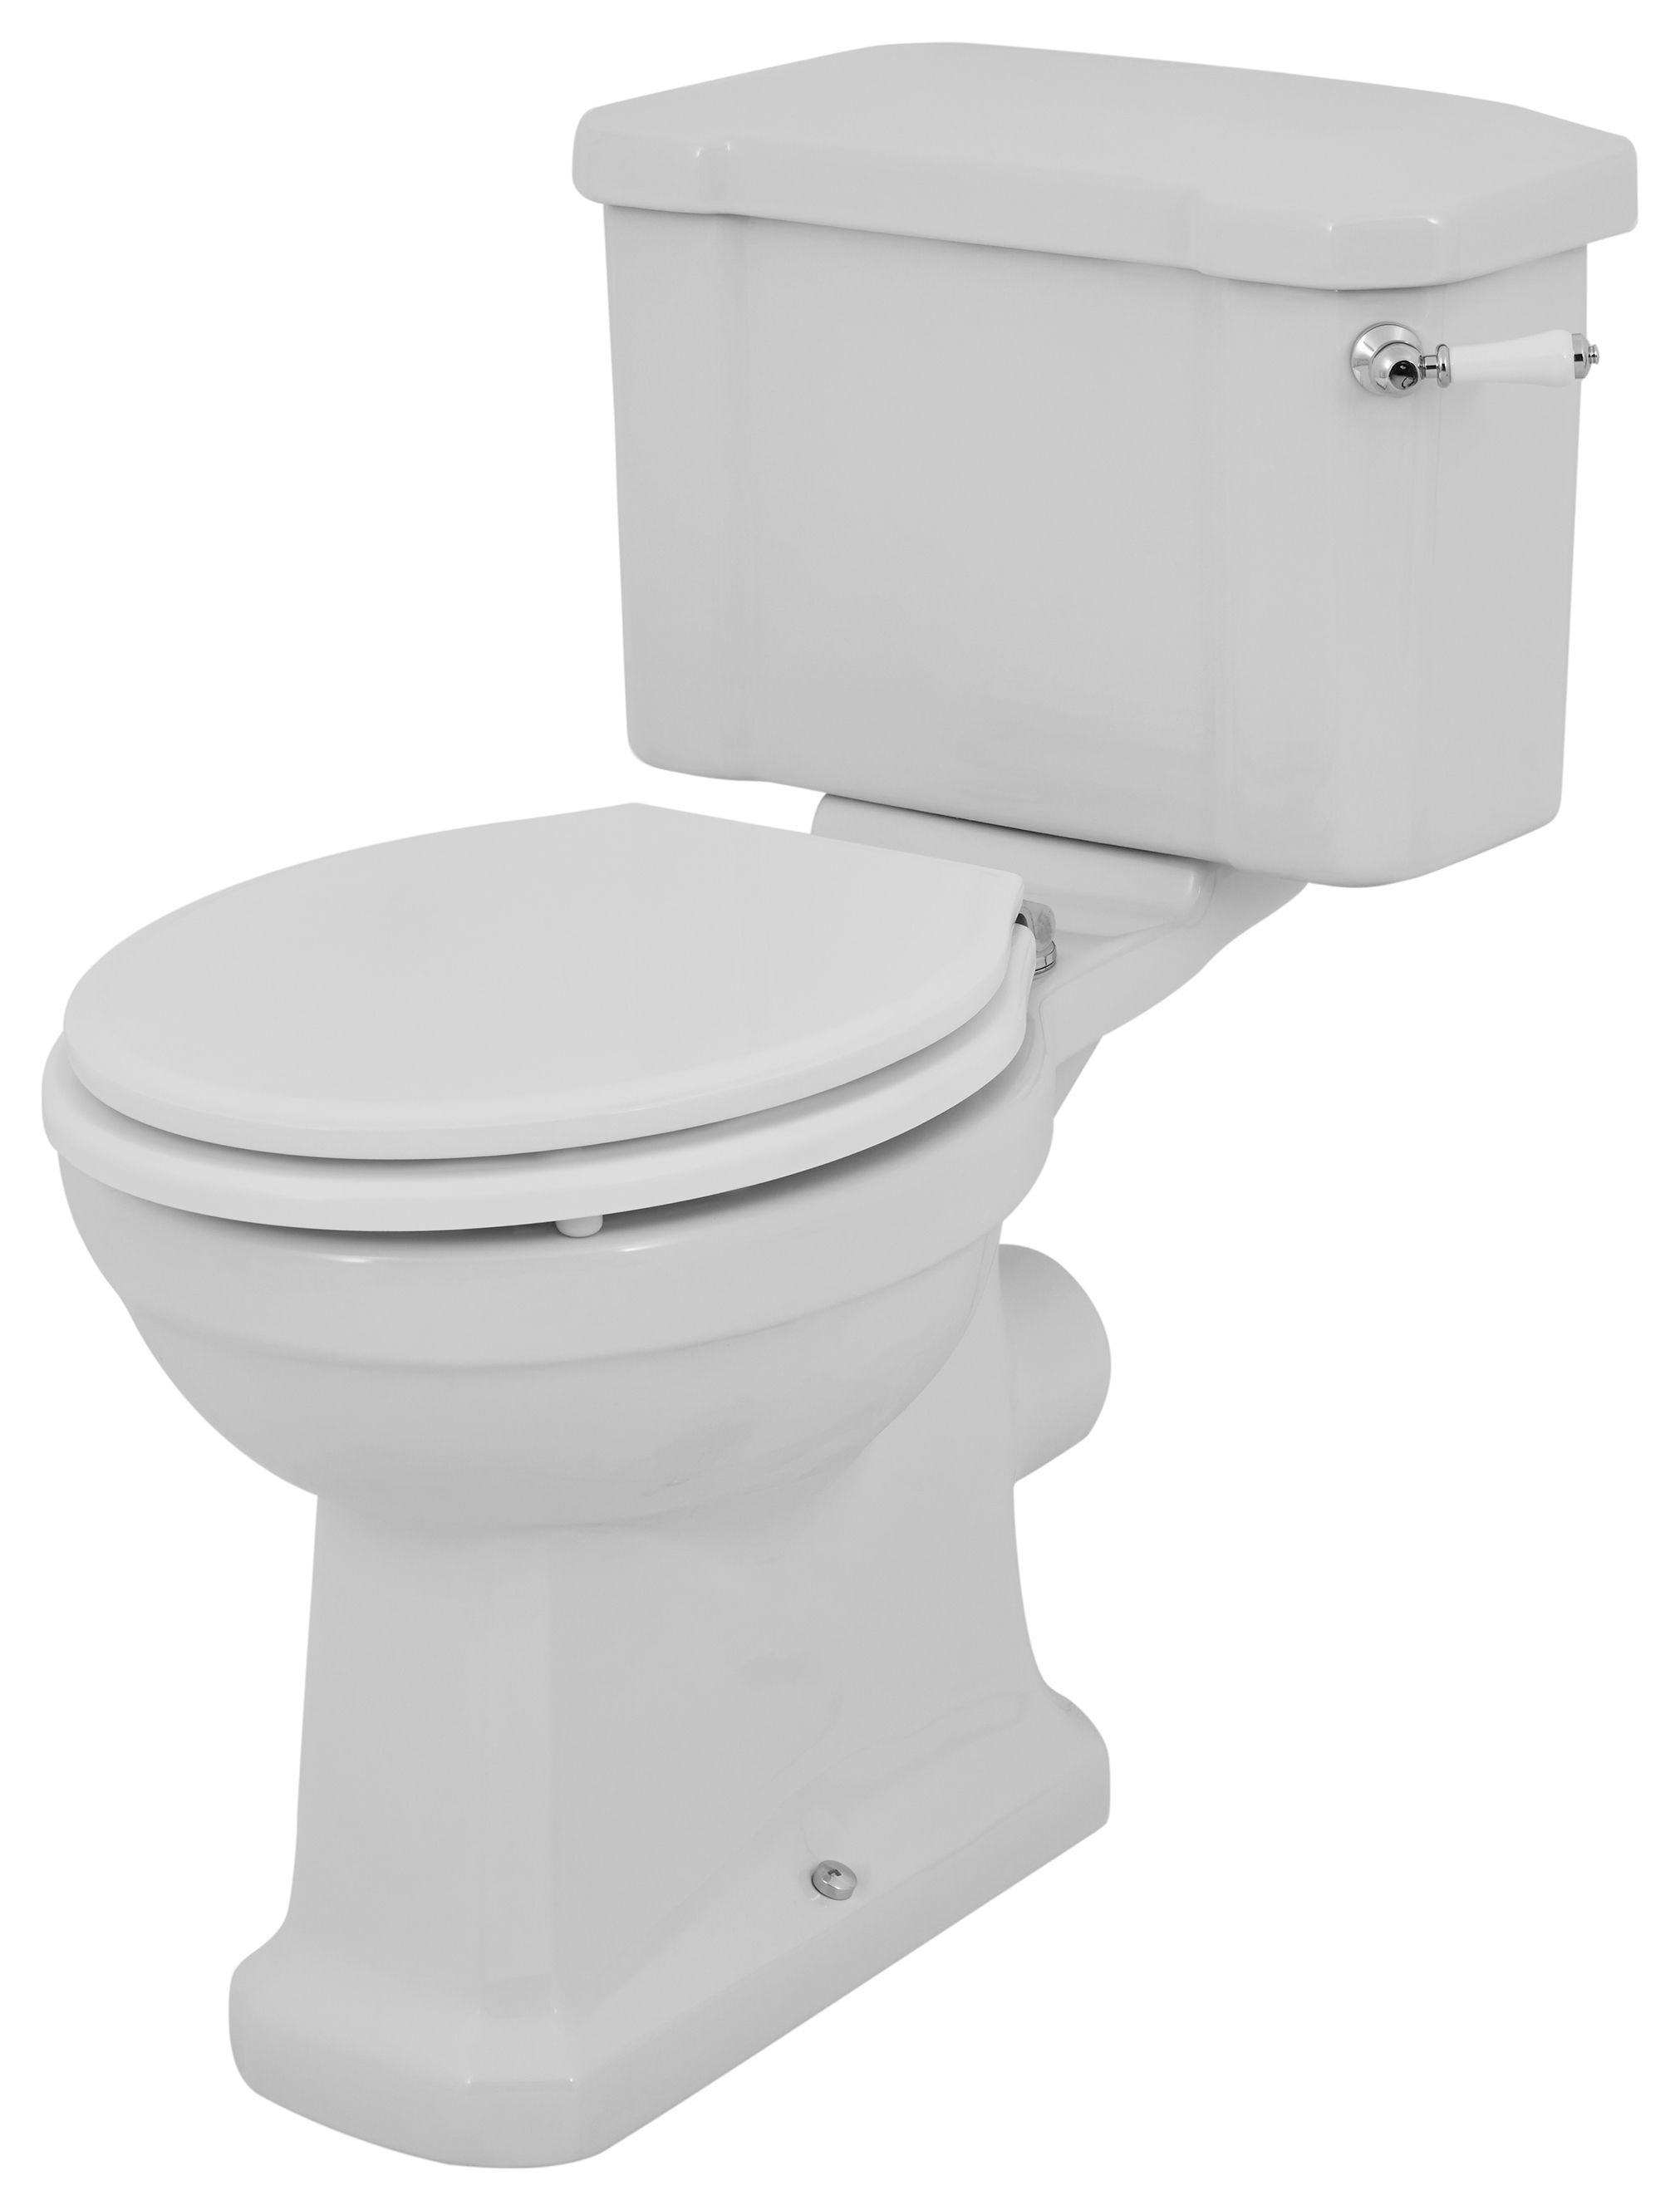 Wickes Oxford Traditional Close Coupled Toilet Pan, Cistern & White Soft Close Seat